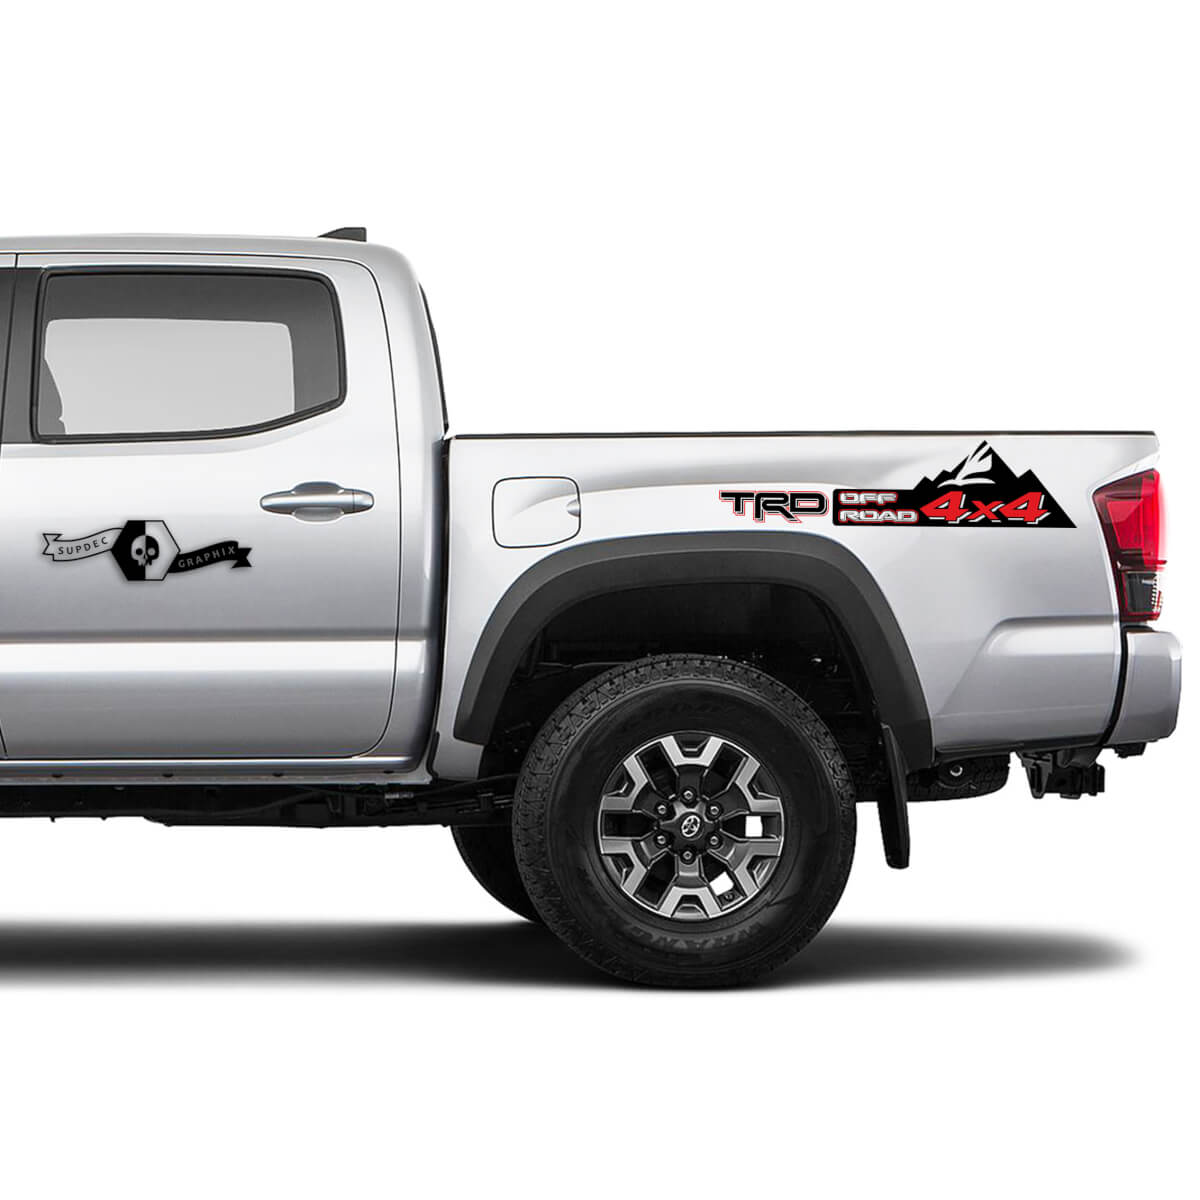 TRD Off 4x4 Road Side Mountain  Vinyl Stickers TOYOTA Decals Stickers for Tacoma Tundra 4Runner Hilux